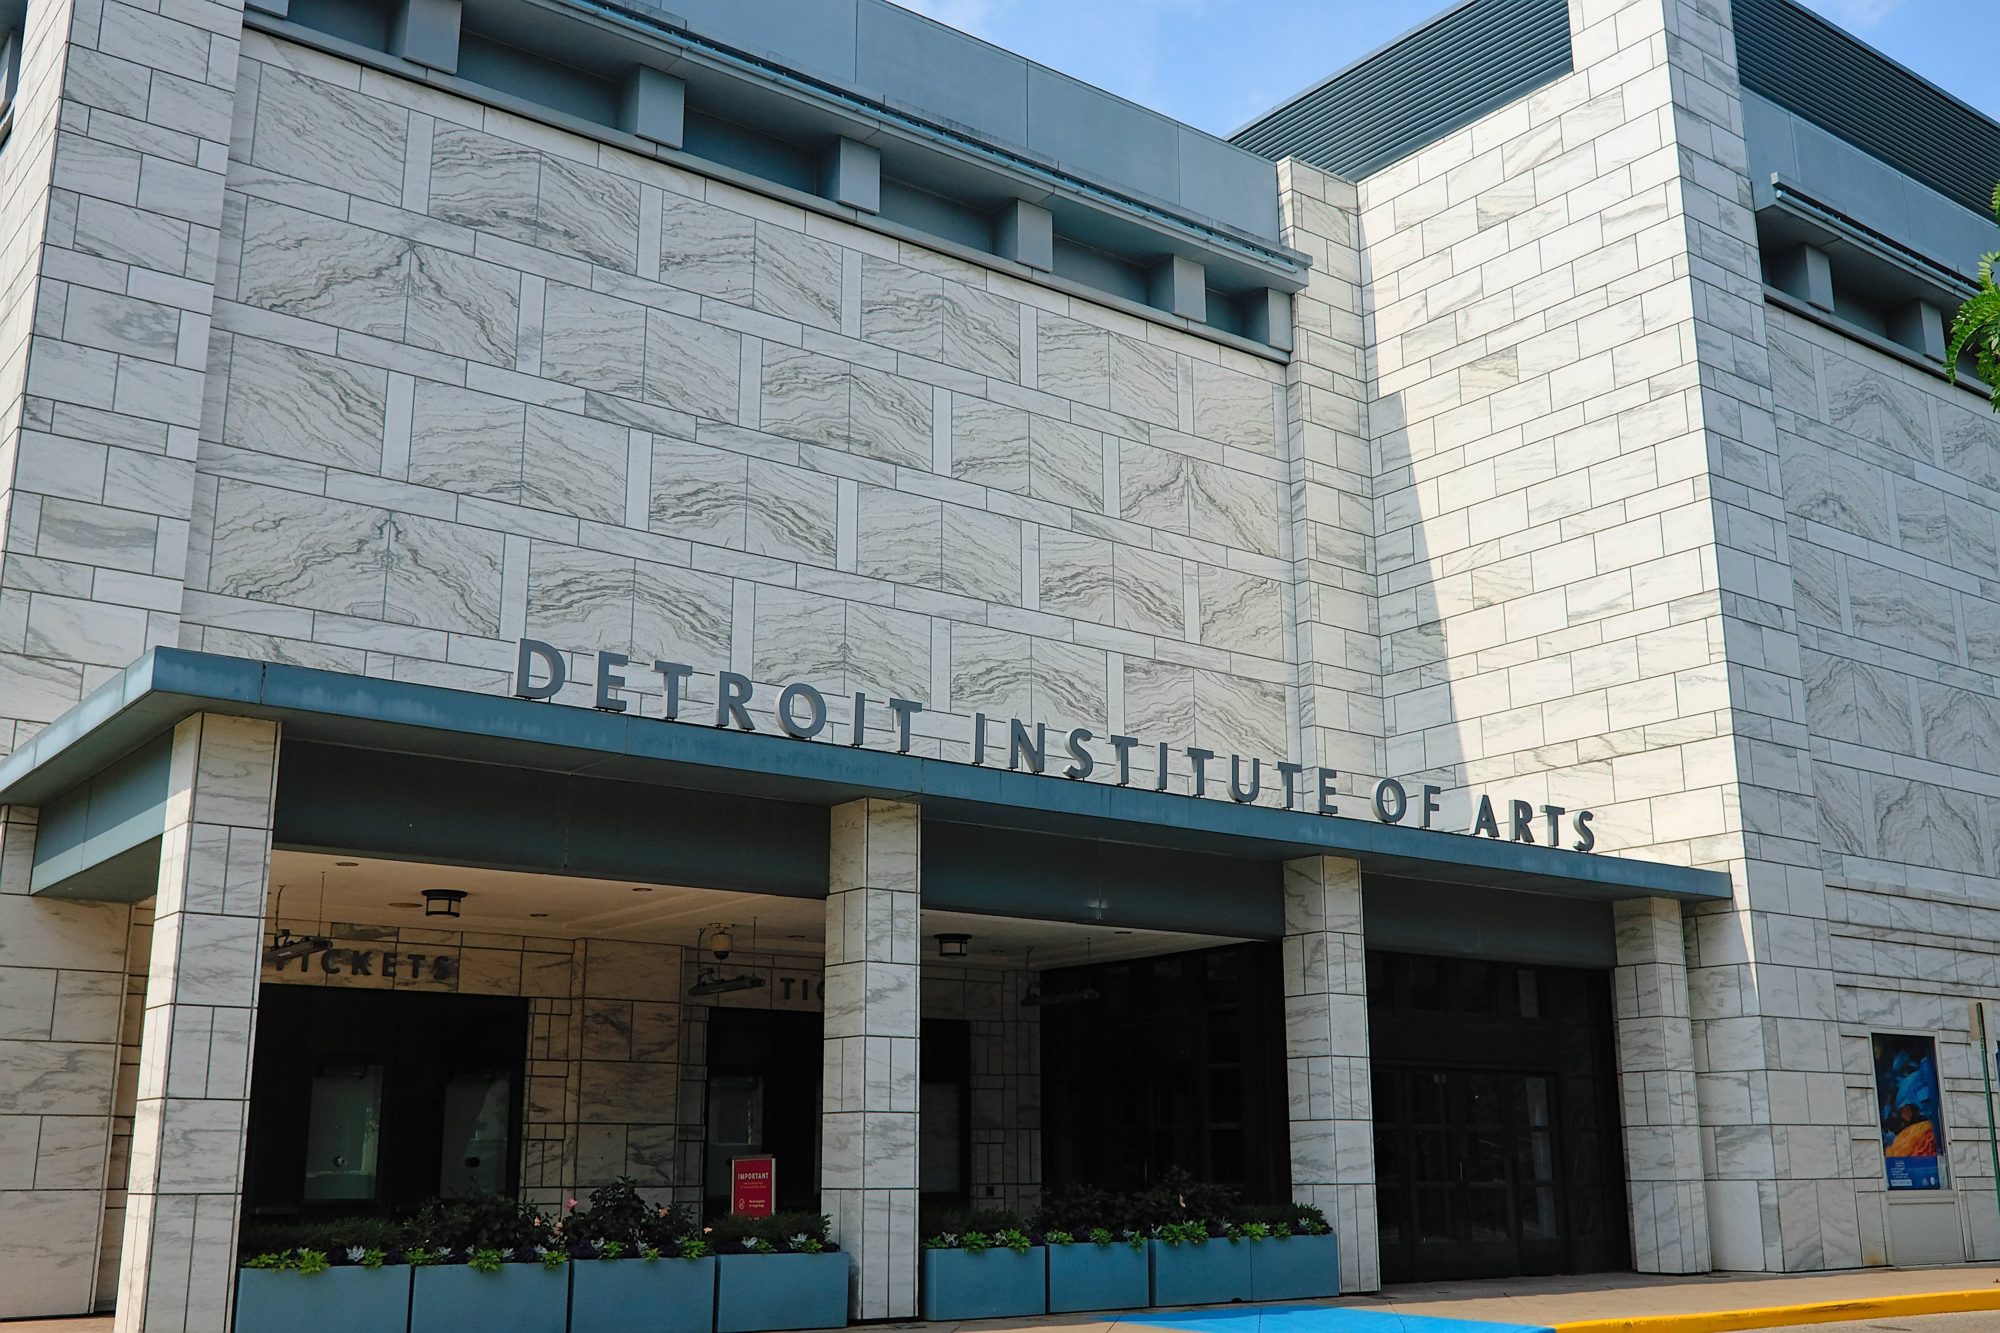 Entrance to the Detroit Institute of Arts